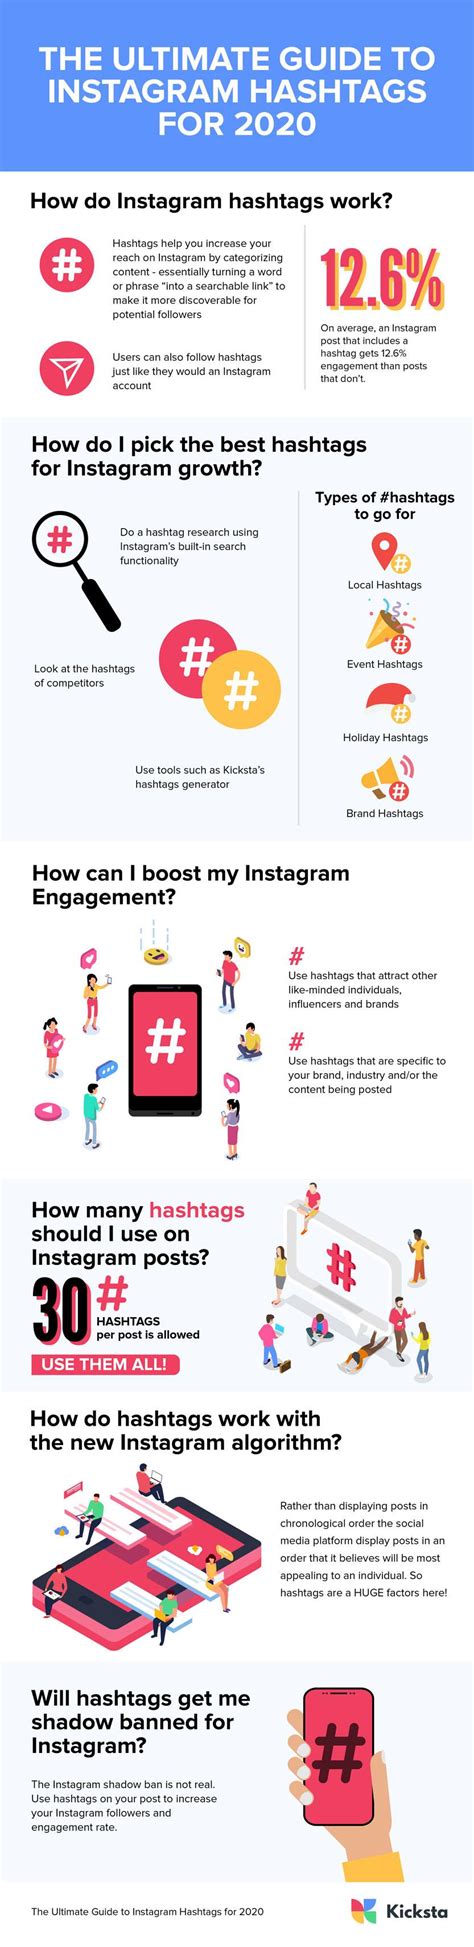 The Ultimate Guide To Instagram Hashtags For 2020